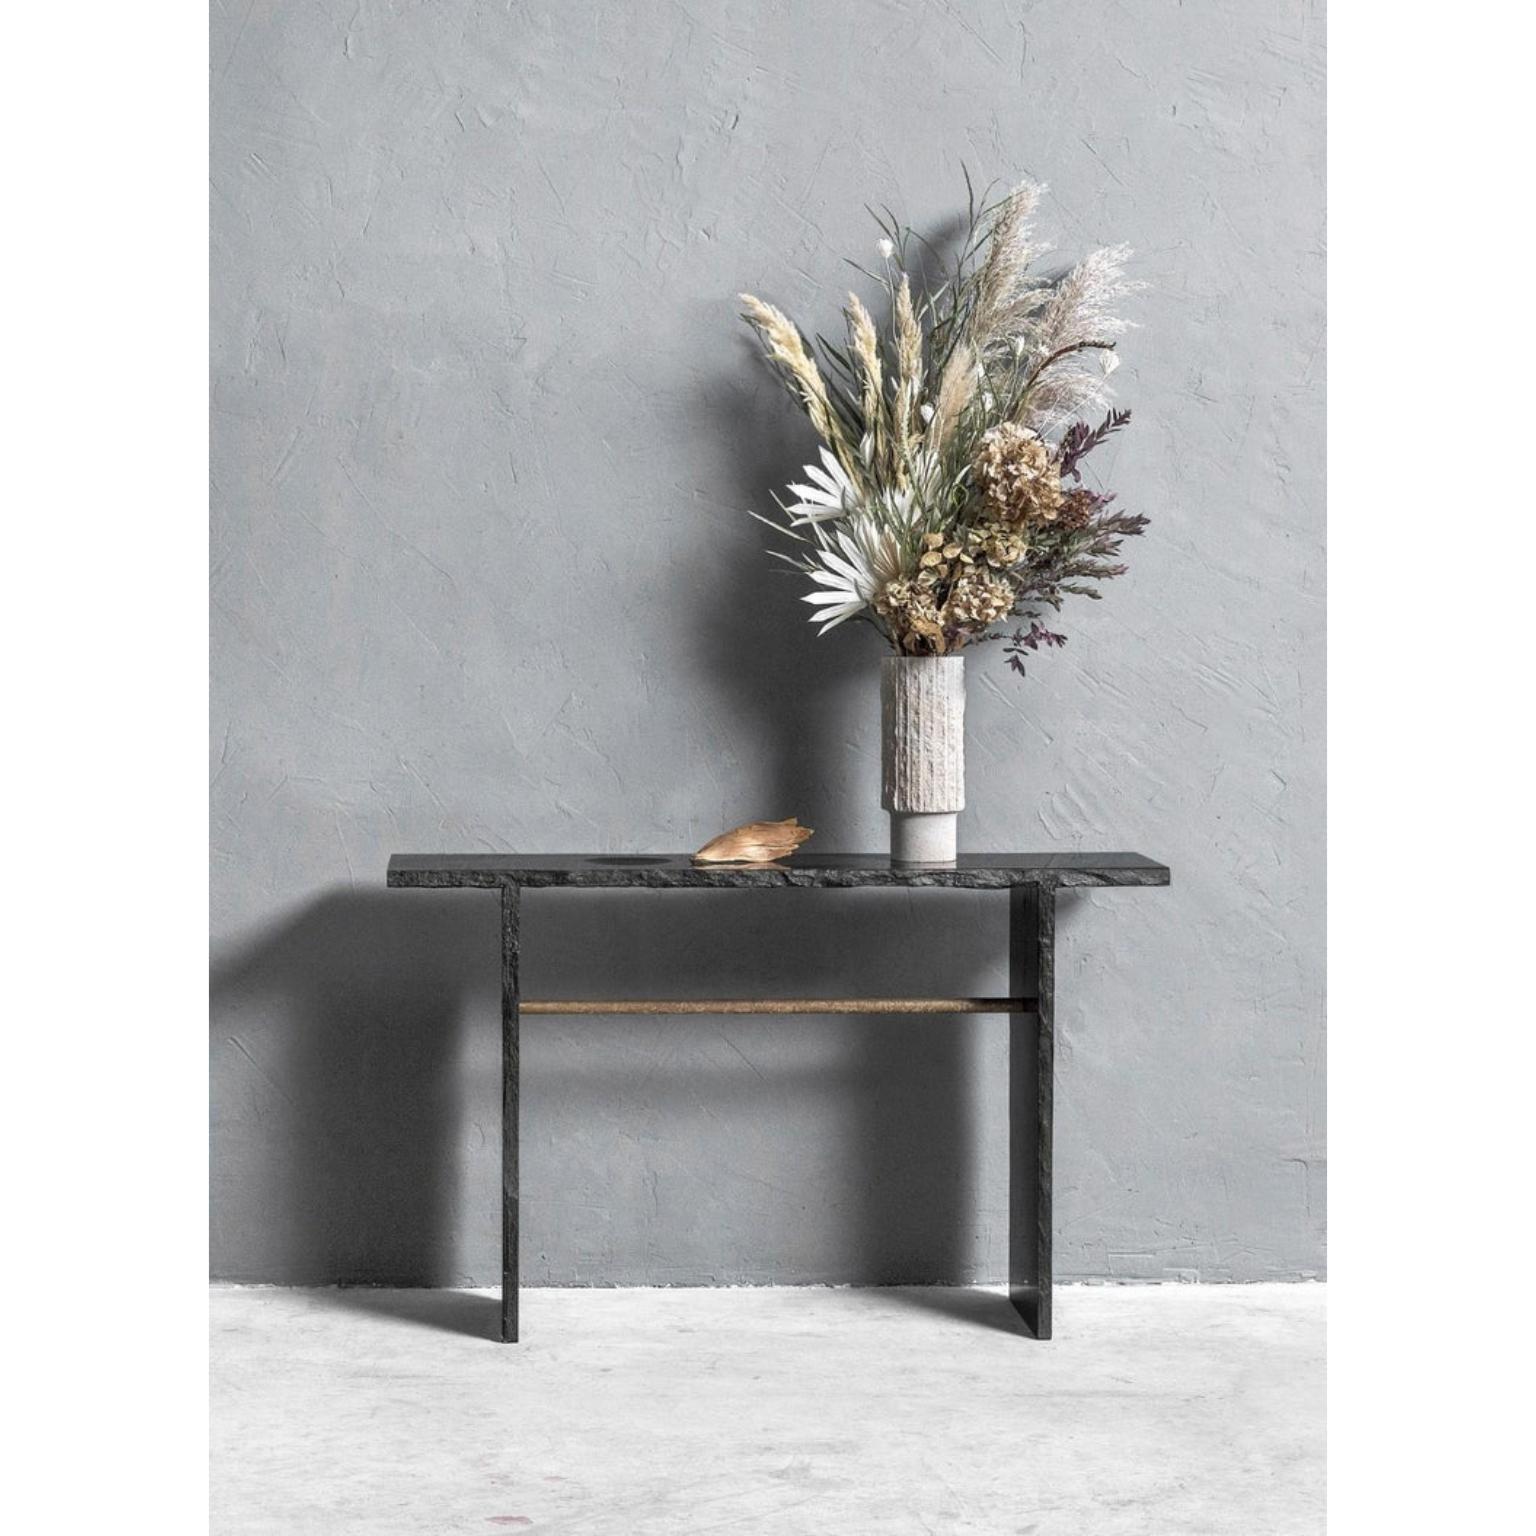 Brass and slate sculpted console by Frederic Saulou
Intègre
Console
Black Slate, chemical engrave brass
Measures: L 150 x W 35 x H 90 cm, approximately 130 kg
Limited edition of 12
Signed and numbered.

